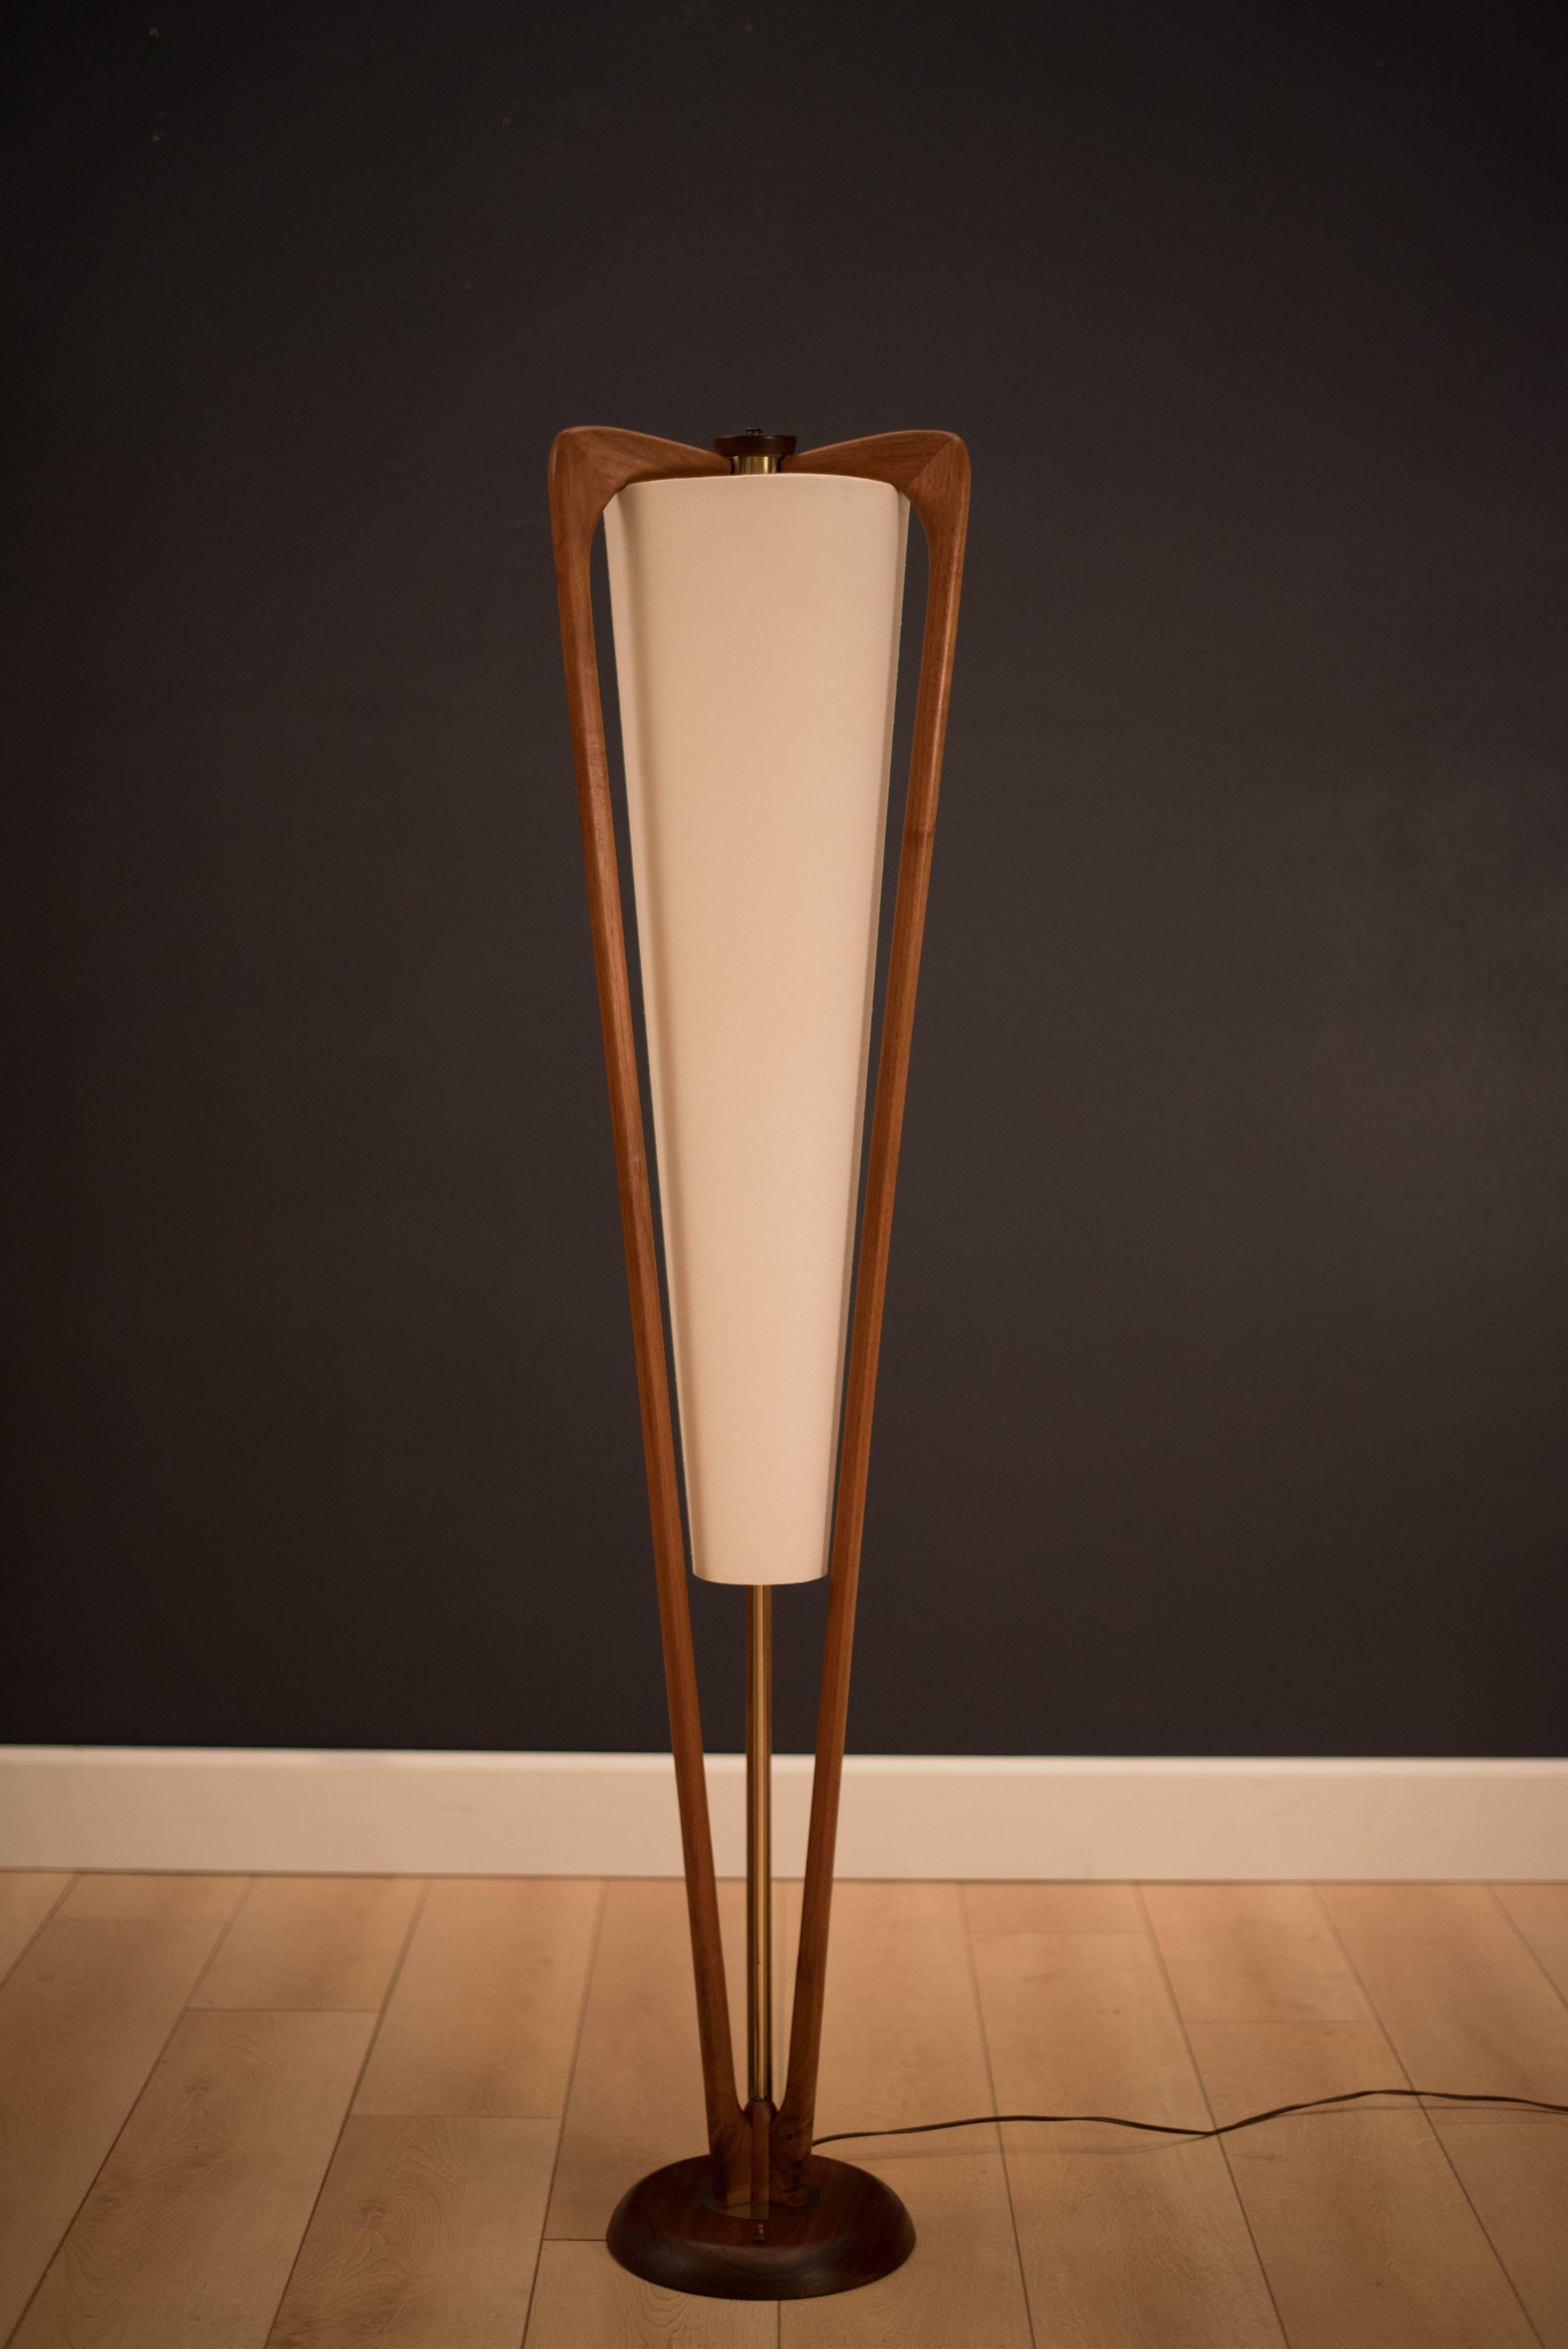 Mid-Century Modern floor lamp by Modeline in walnut. This unique piece displays a sculpted walnut frame and features a three way light switch.
 